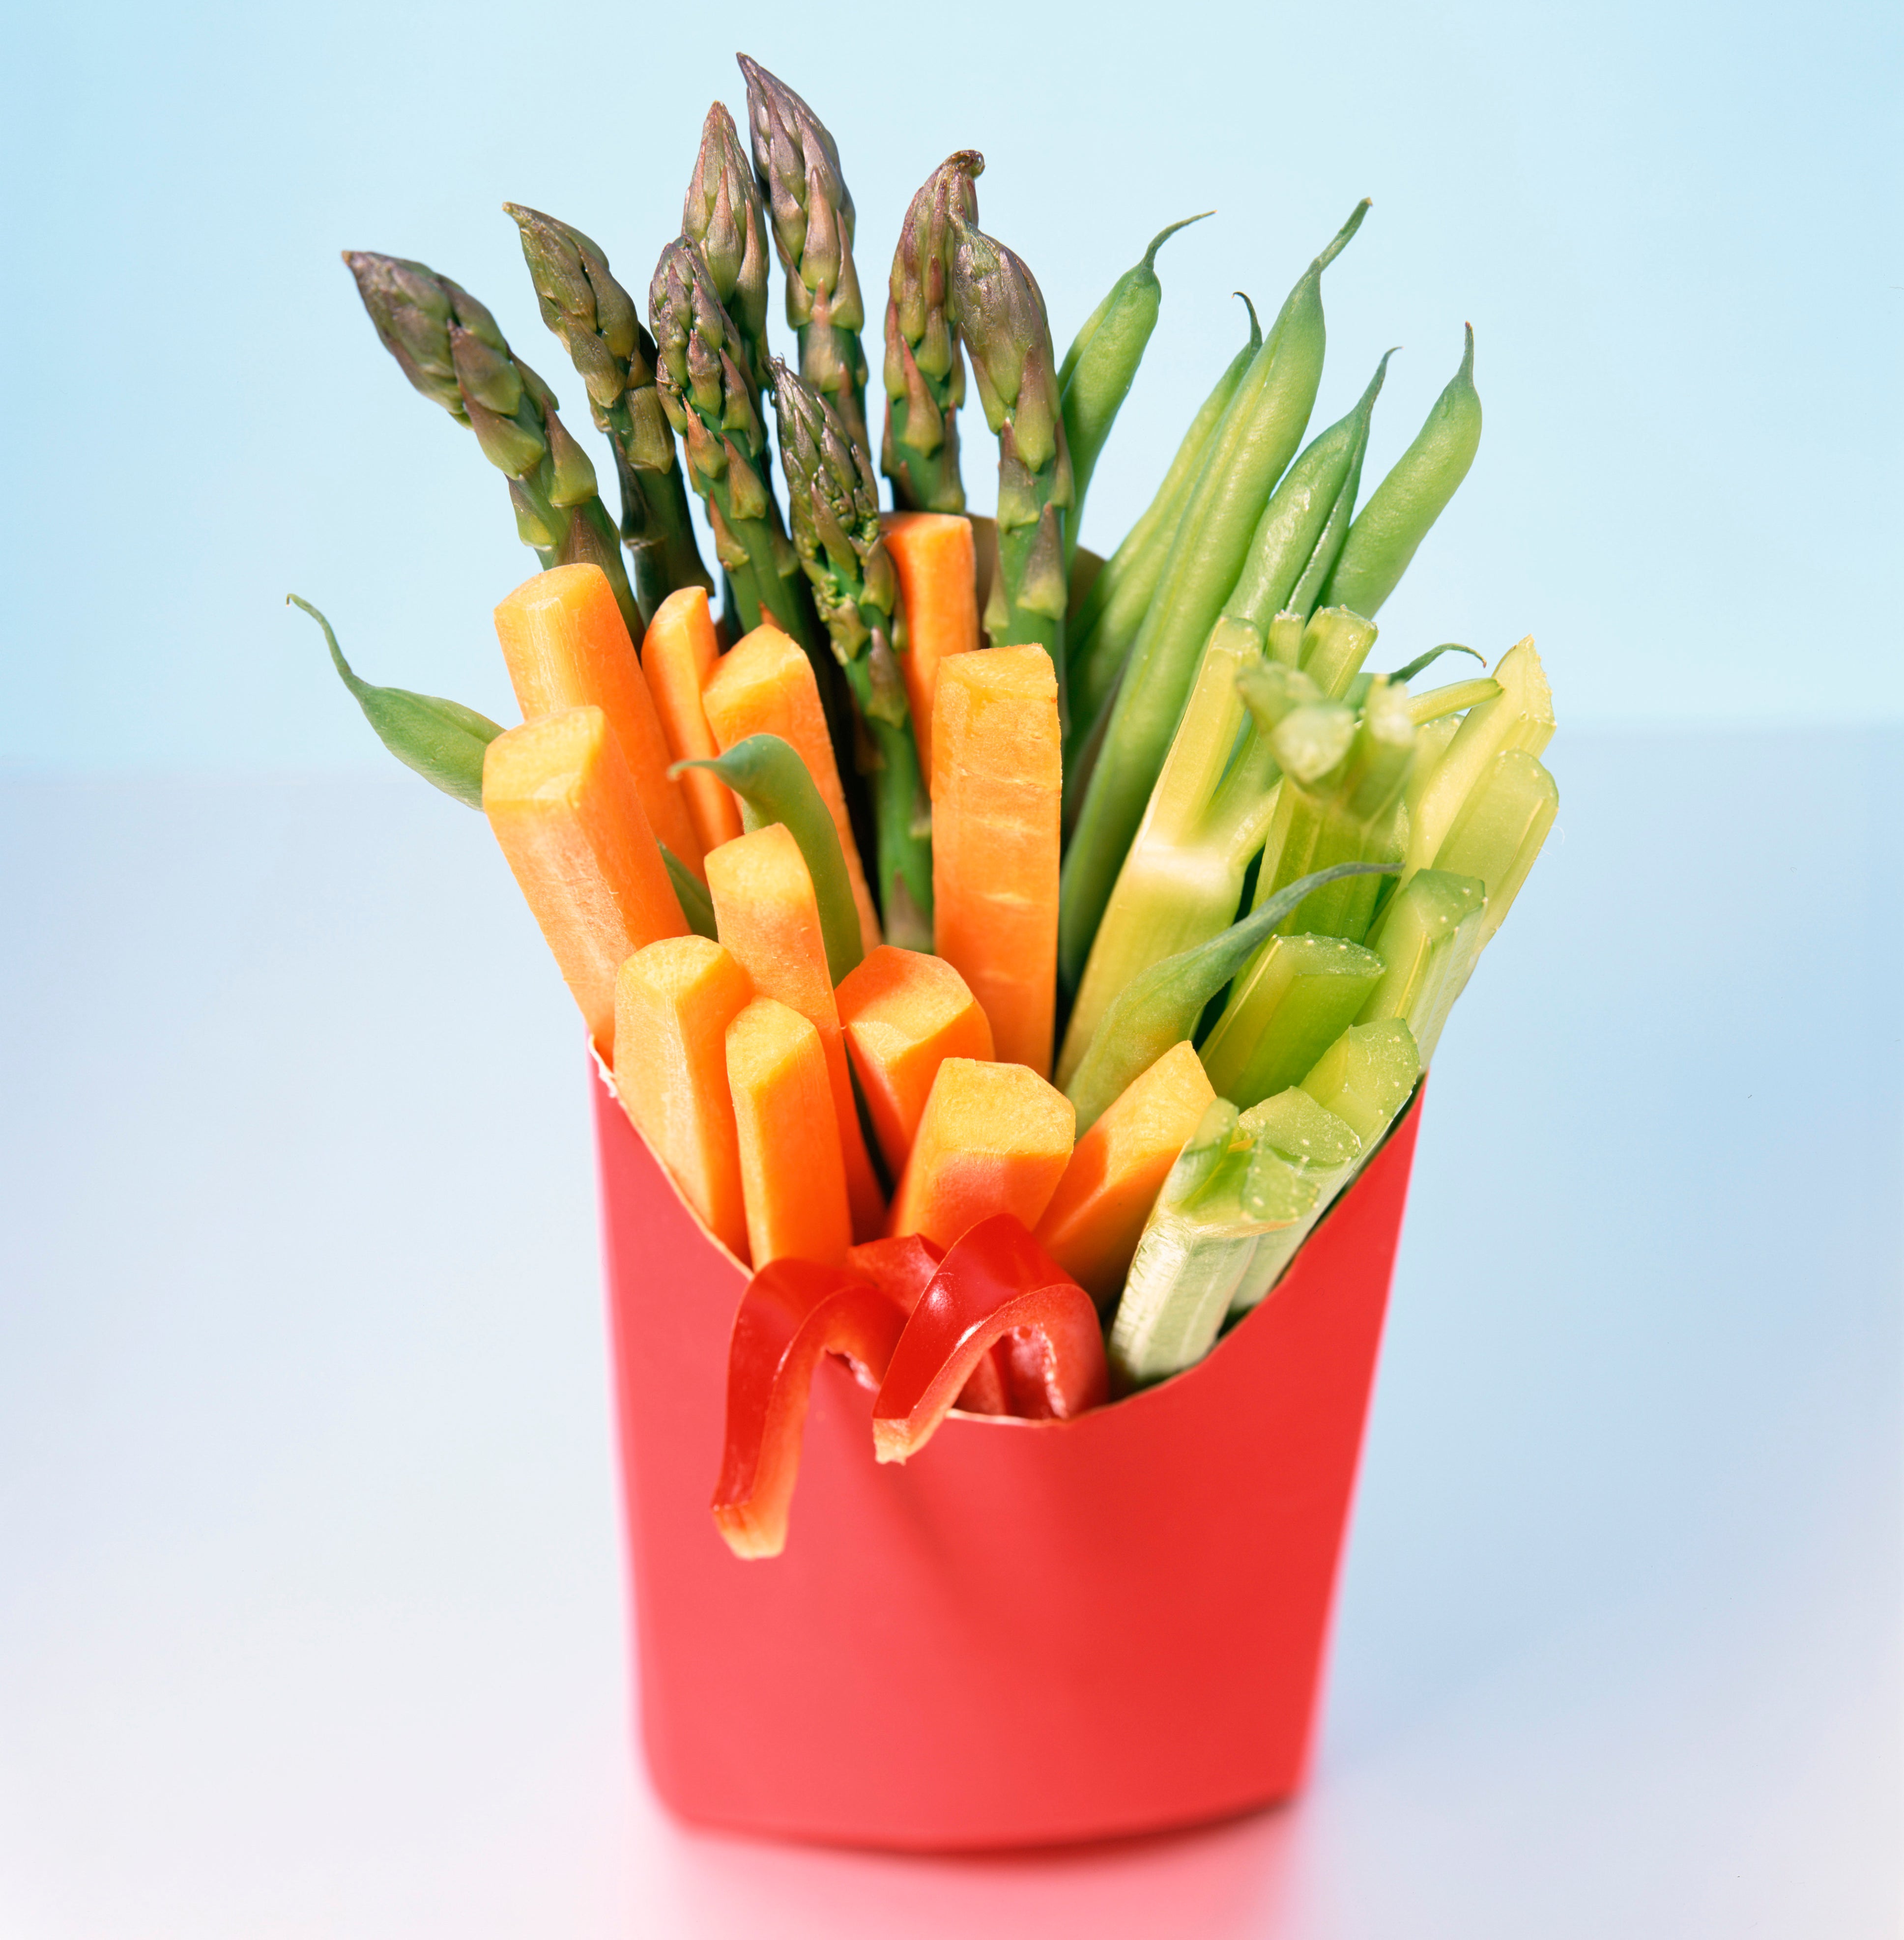 A bouquet of various cut vegetables, including asparagus, presented in a red fast-food container